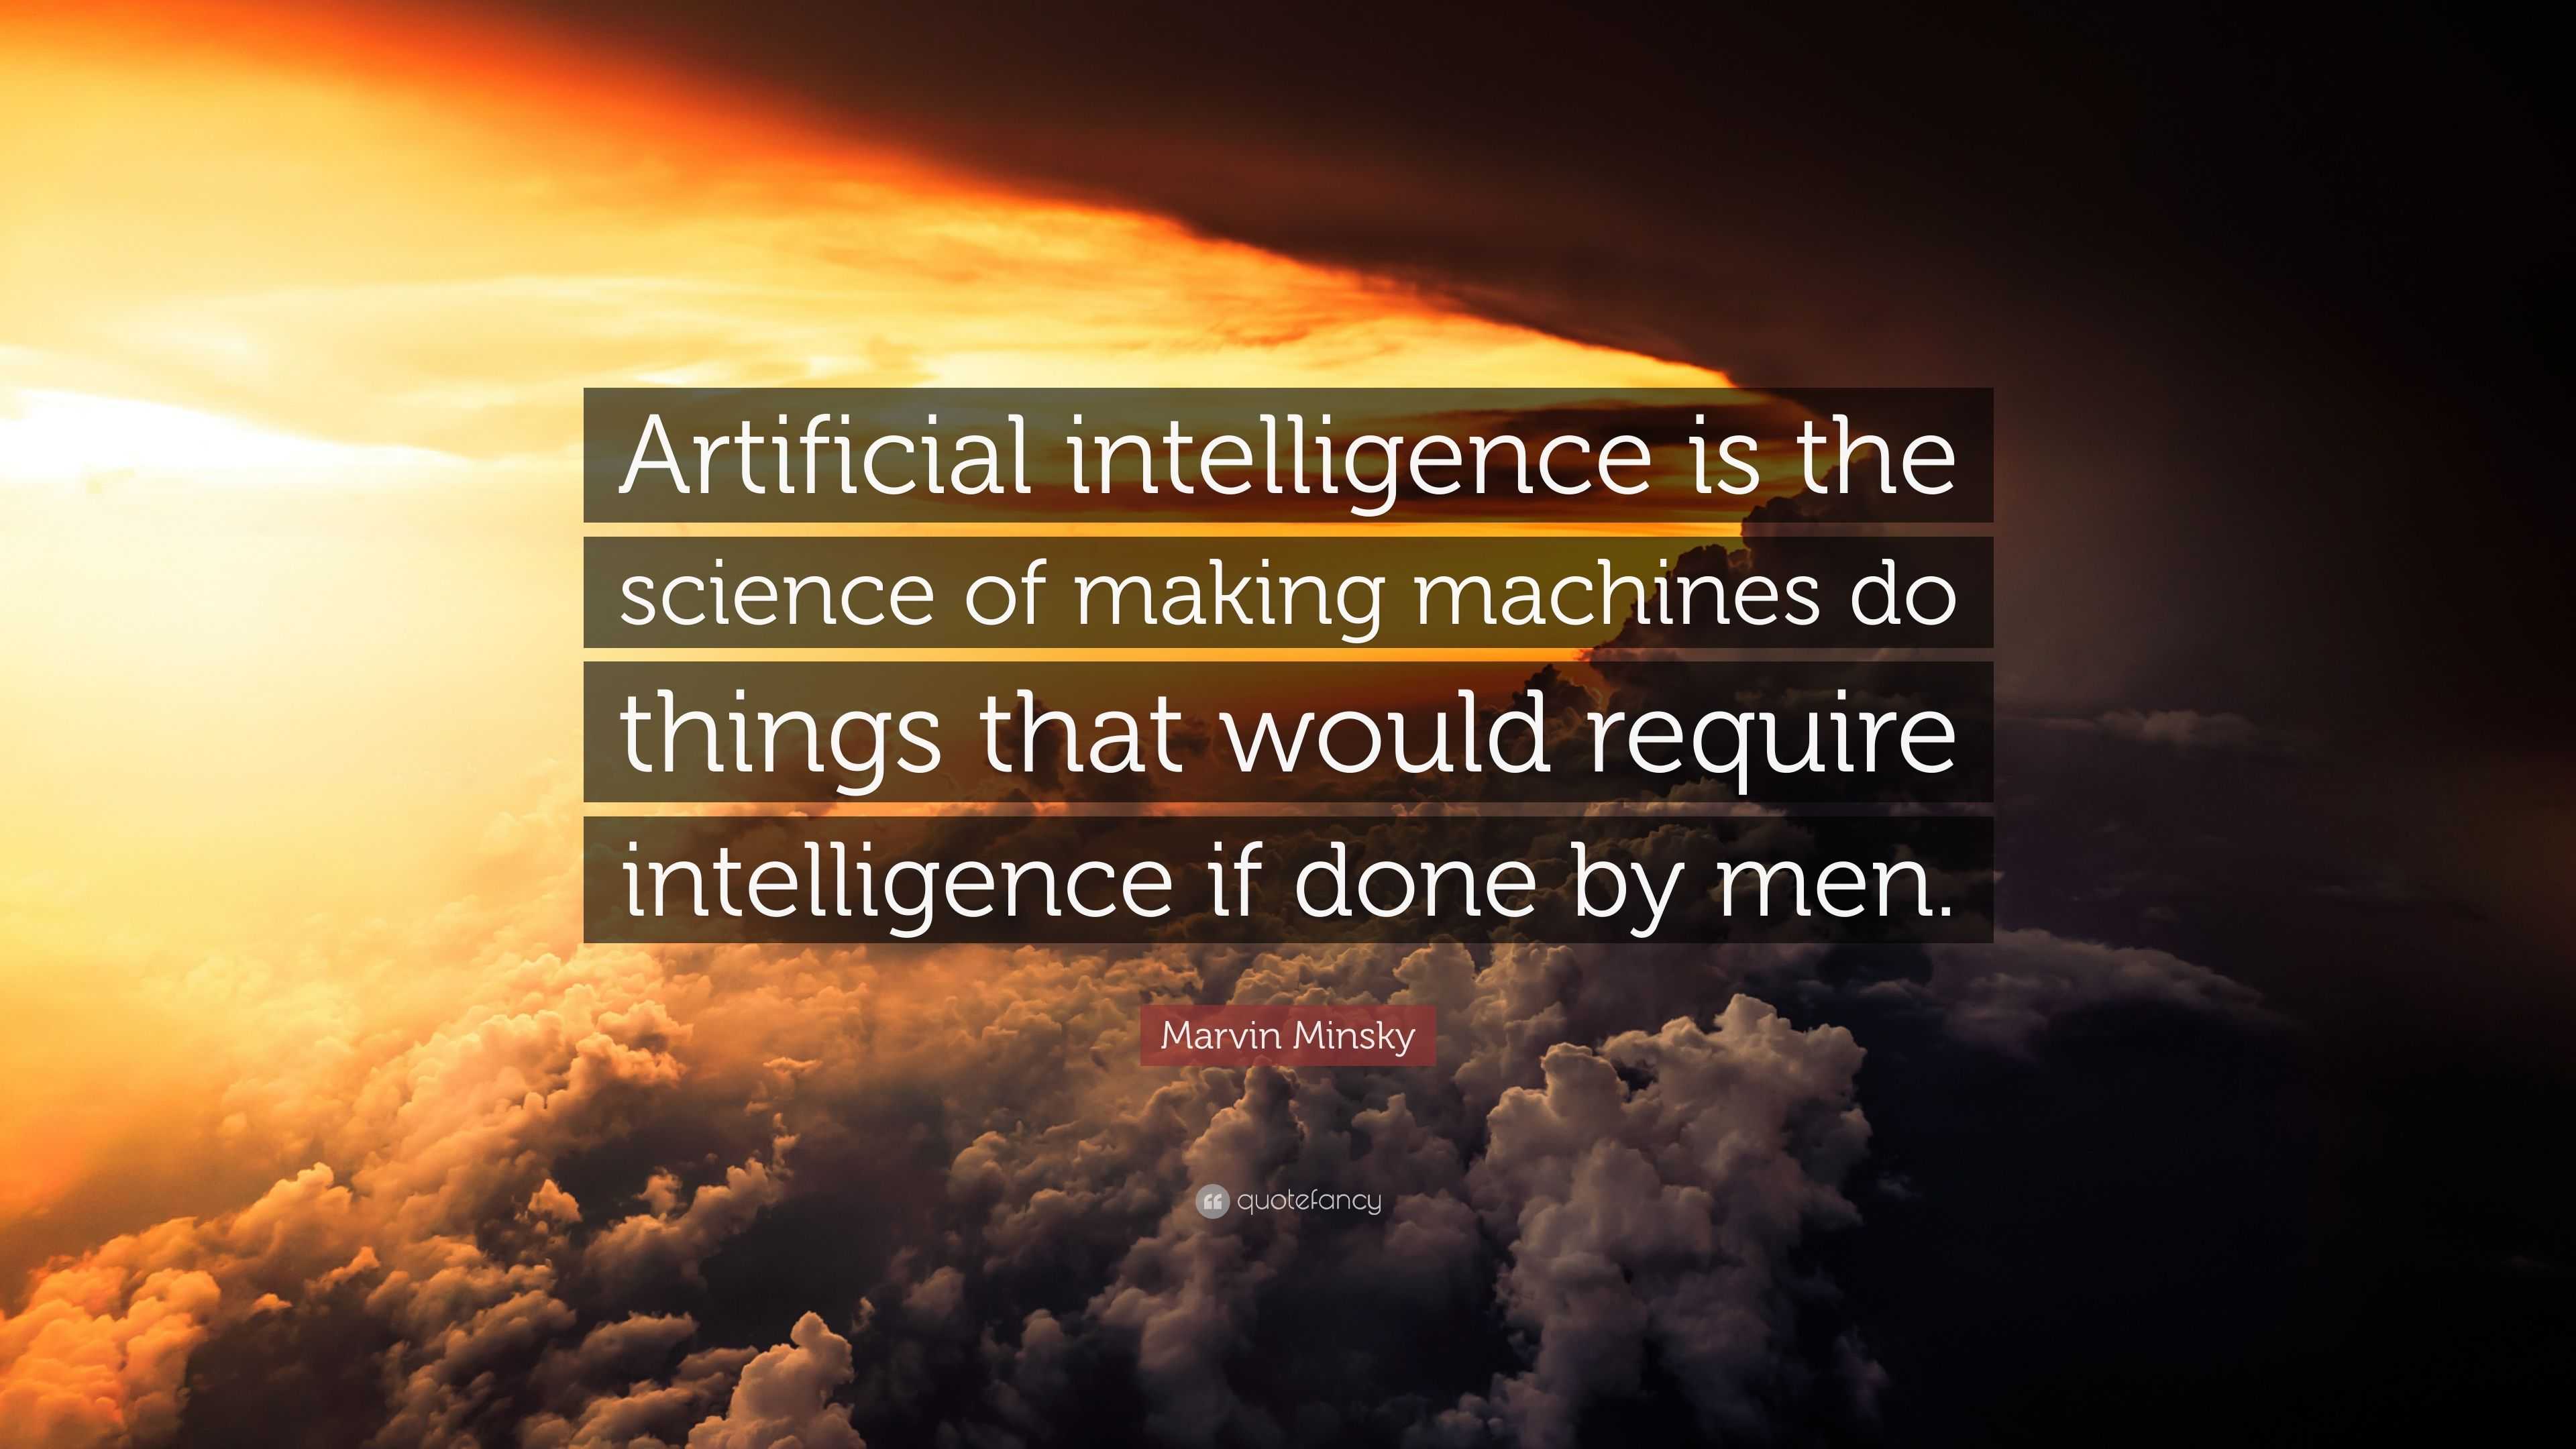 Marvin Minsky Quote: “Artificial intelligence is the science of making ...